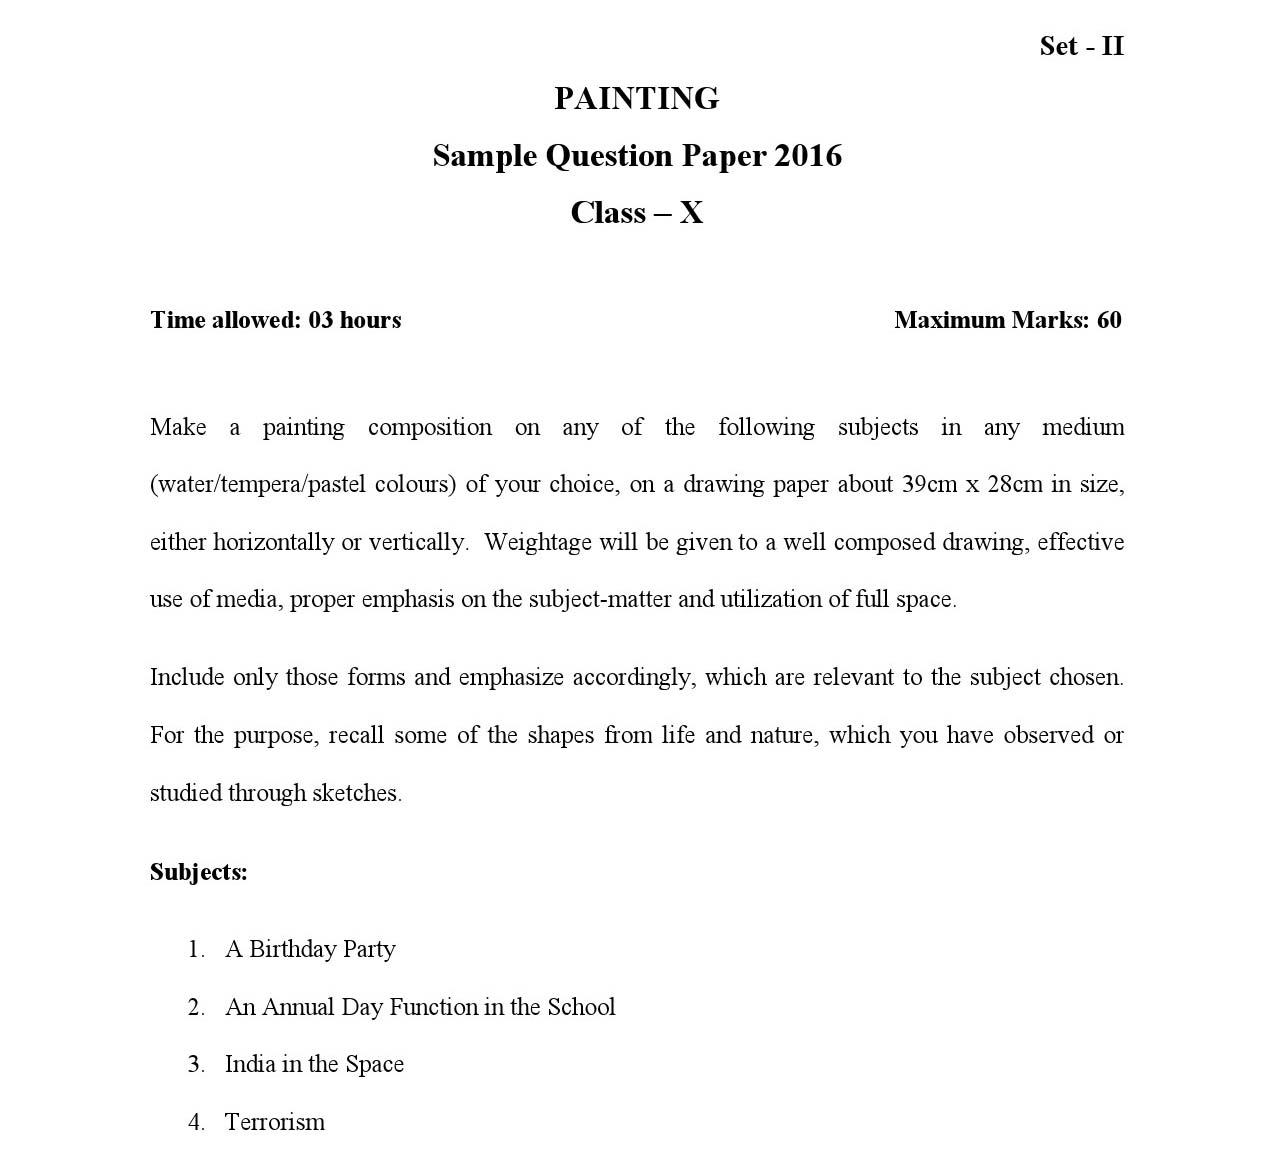 Painting CBSE Class X Sample Question Paper 2015 16 - Image 1